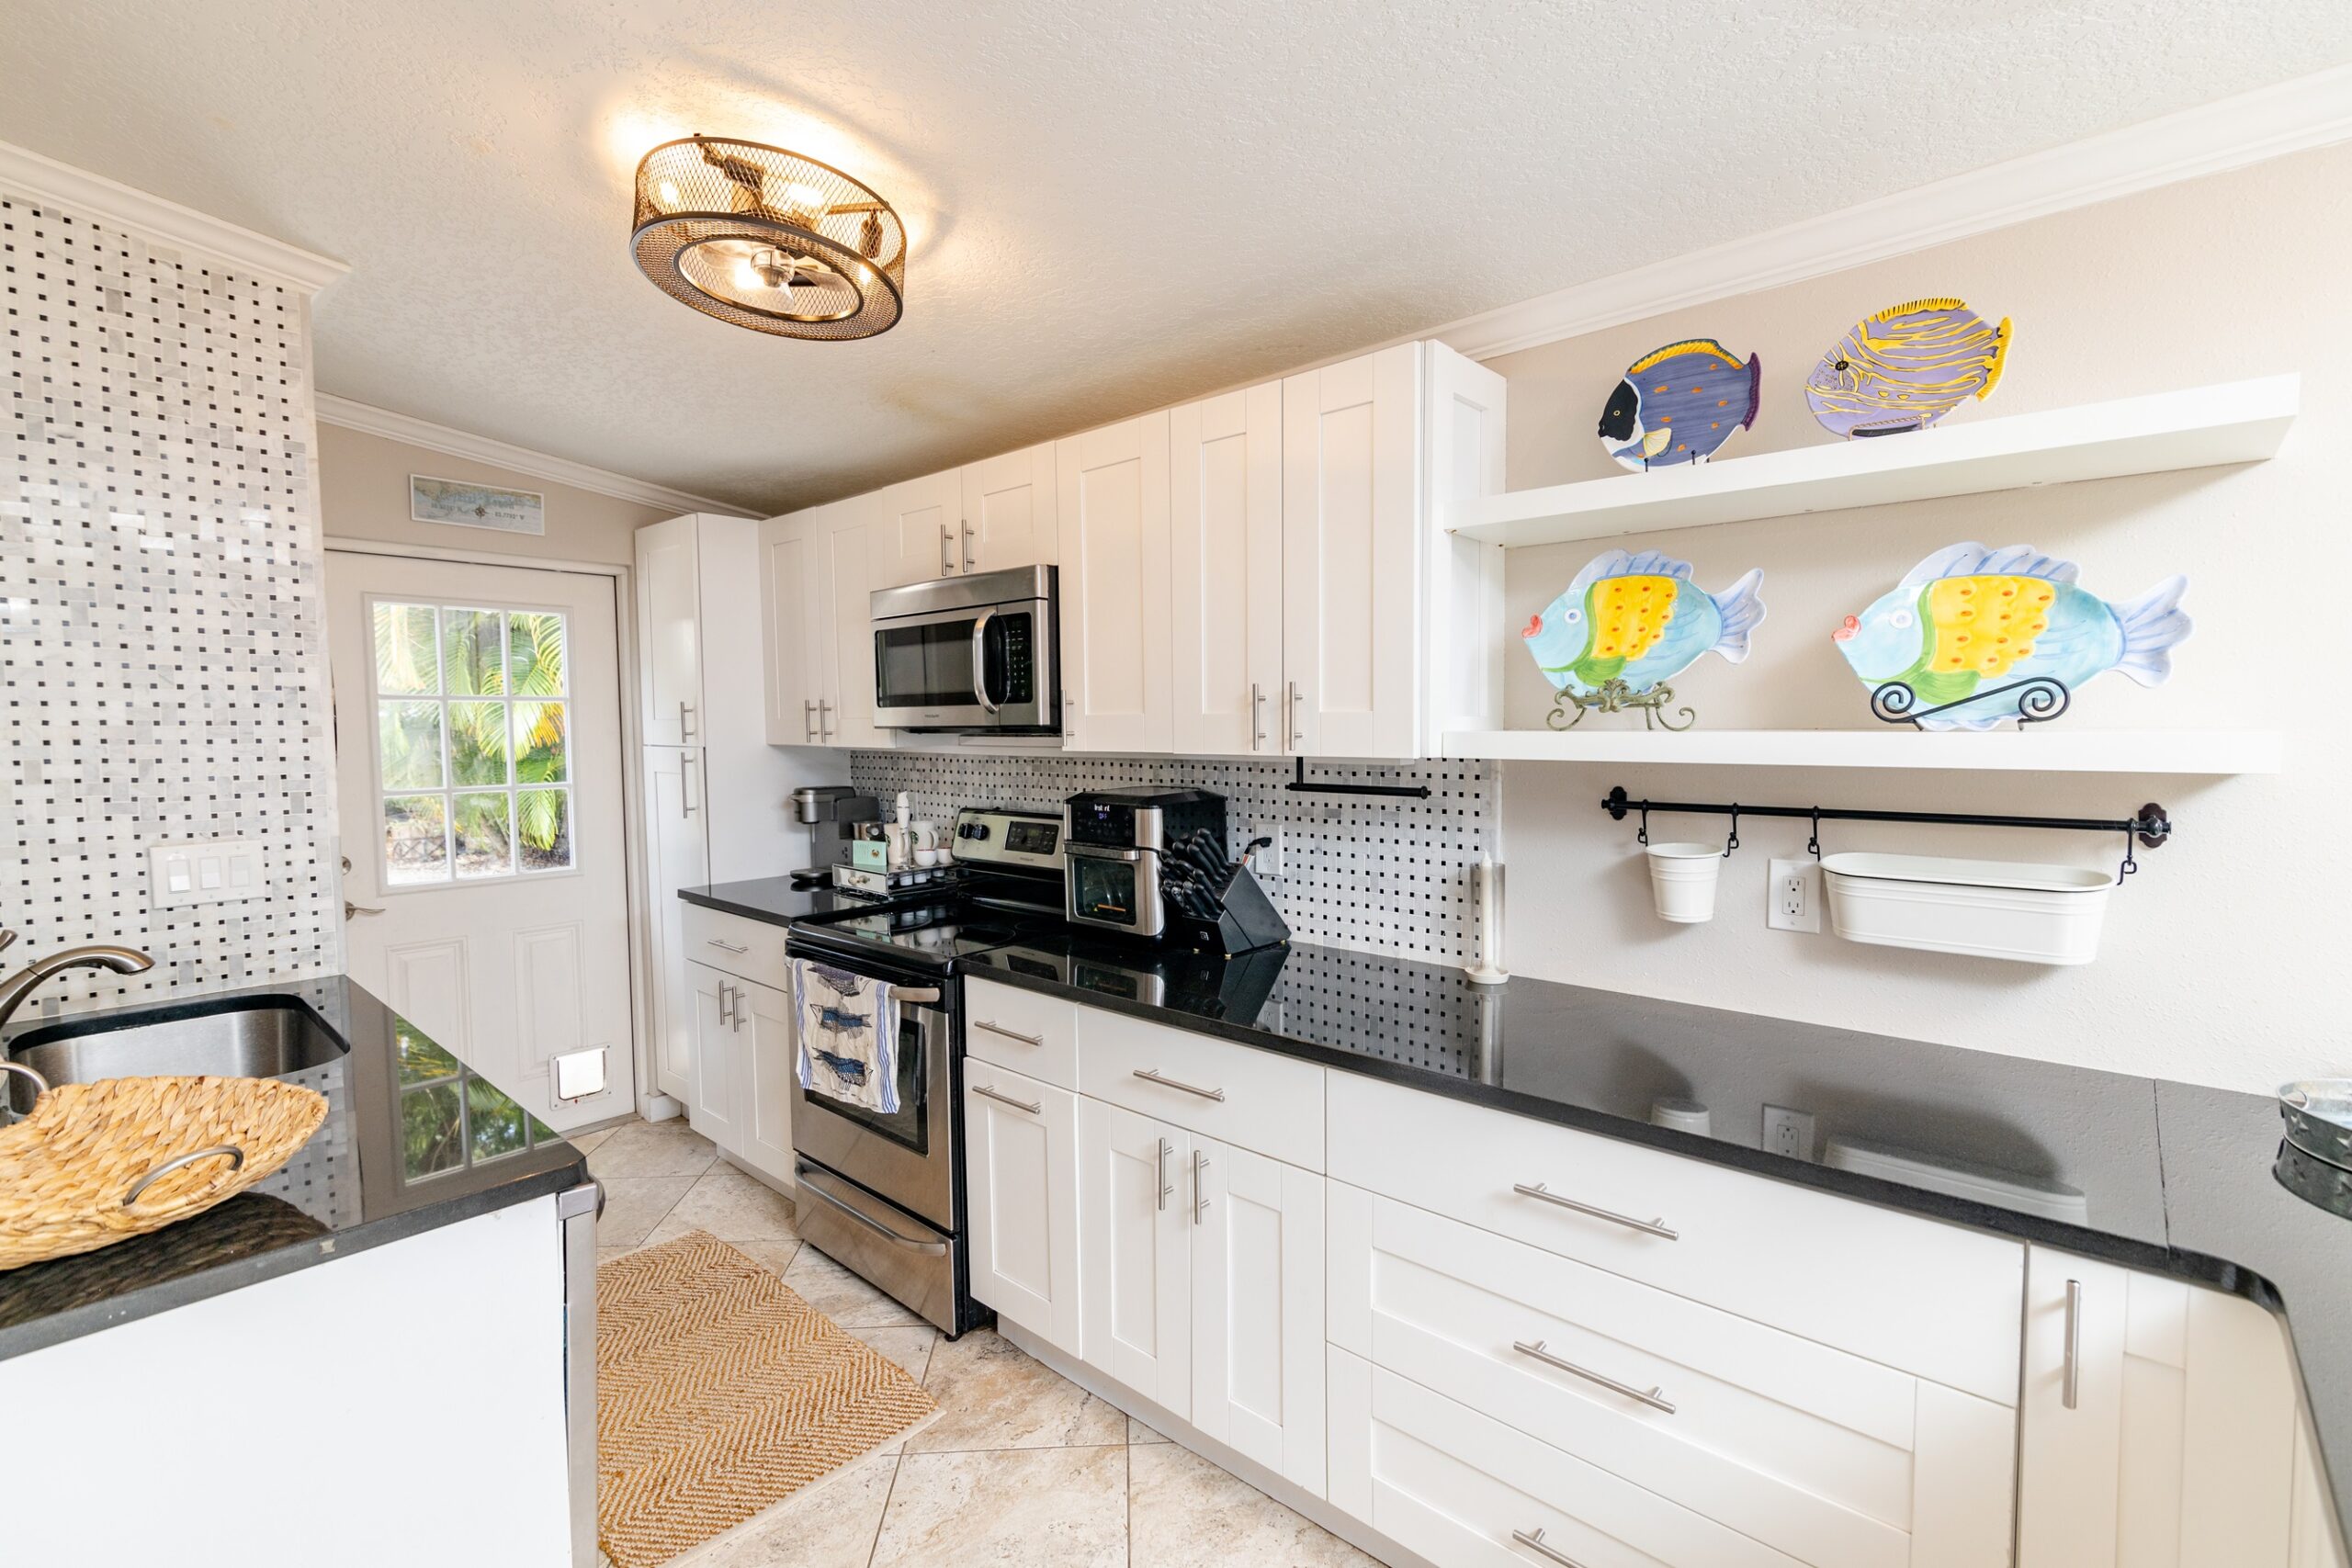 tampa bay florida real estate photography service showing a kitchen modern white